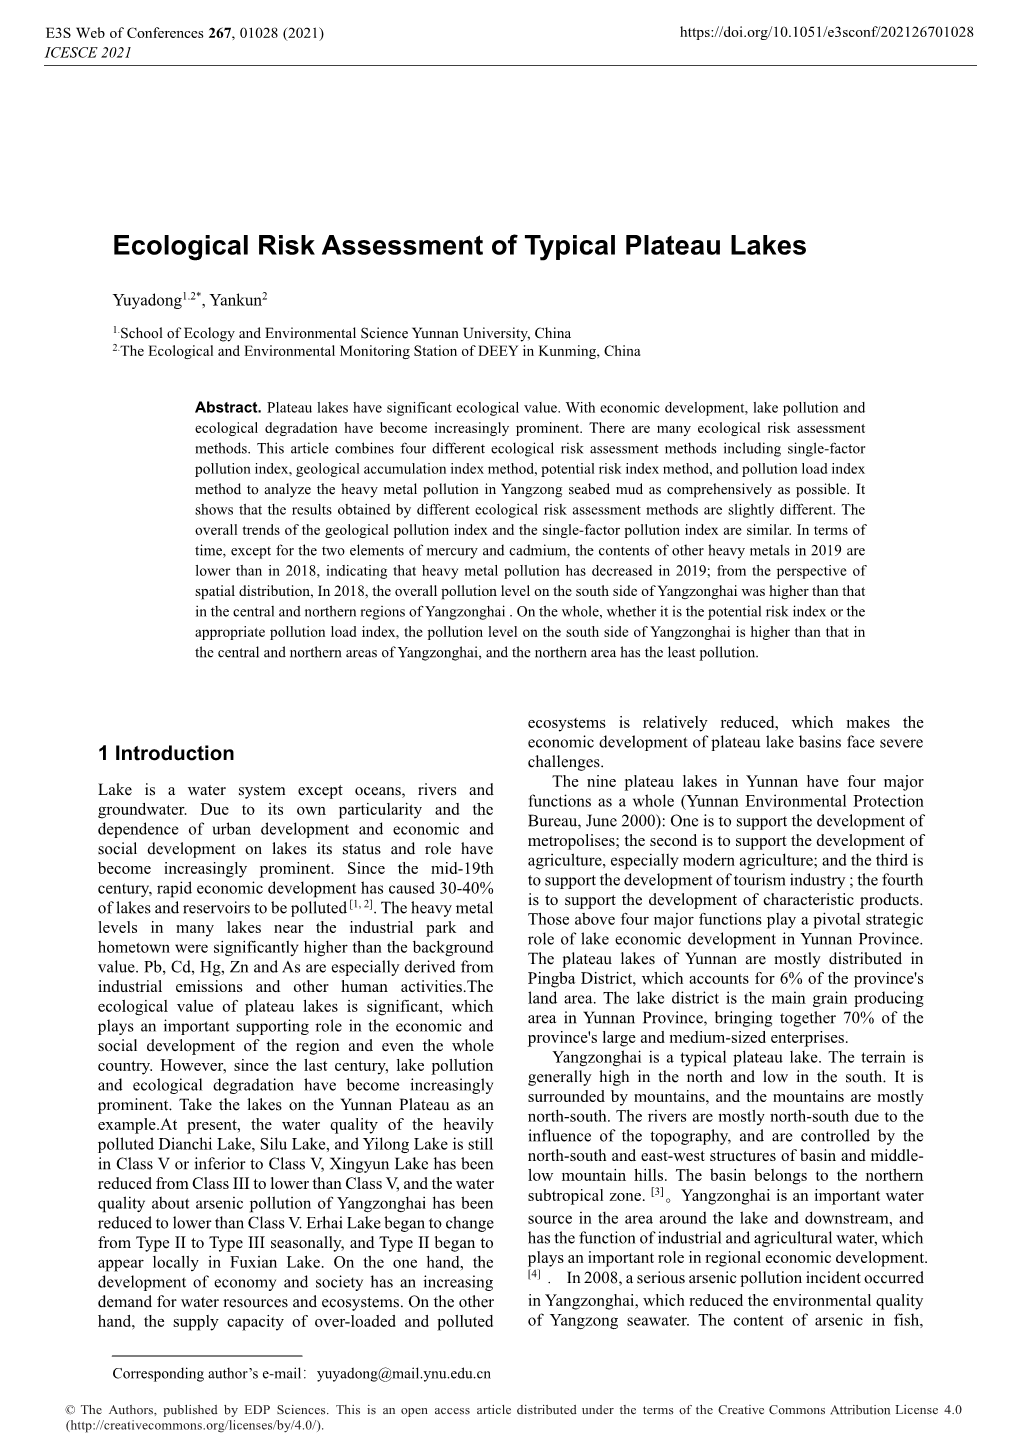 Ecological Risk Assessment of Typical Plateau Lakes